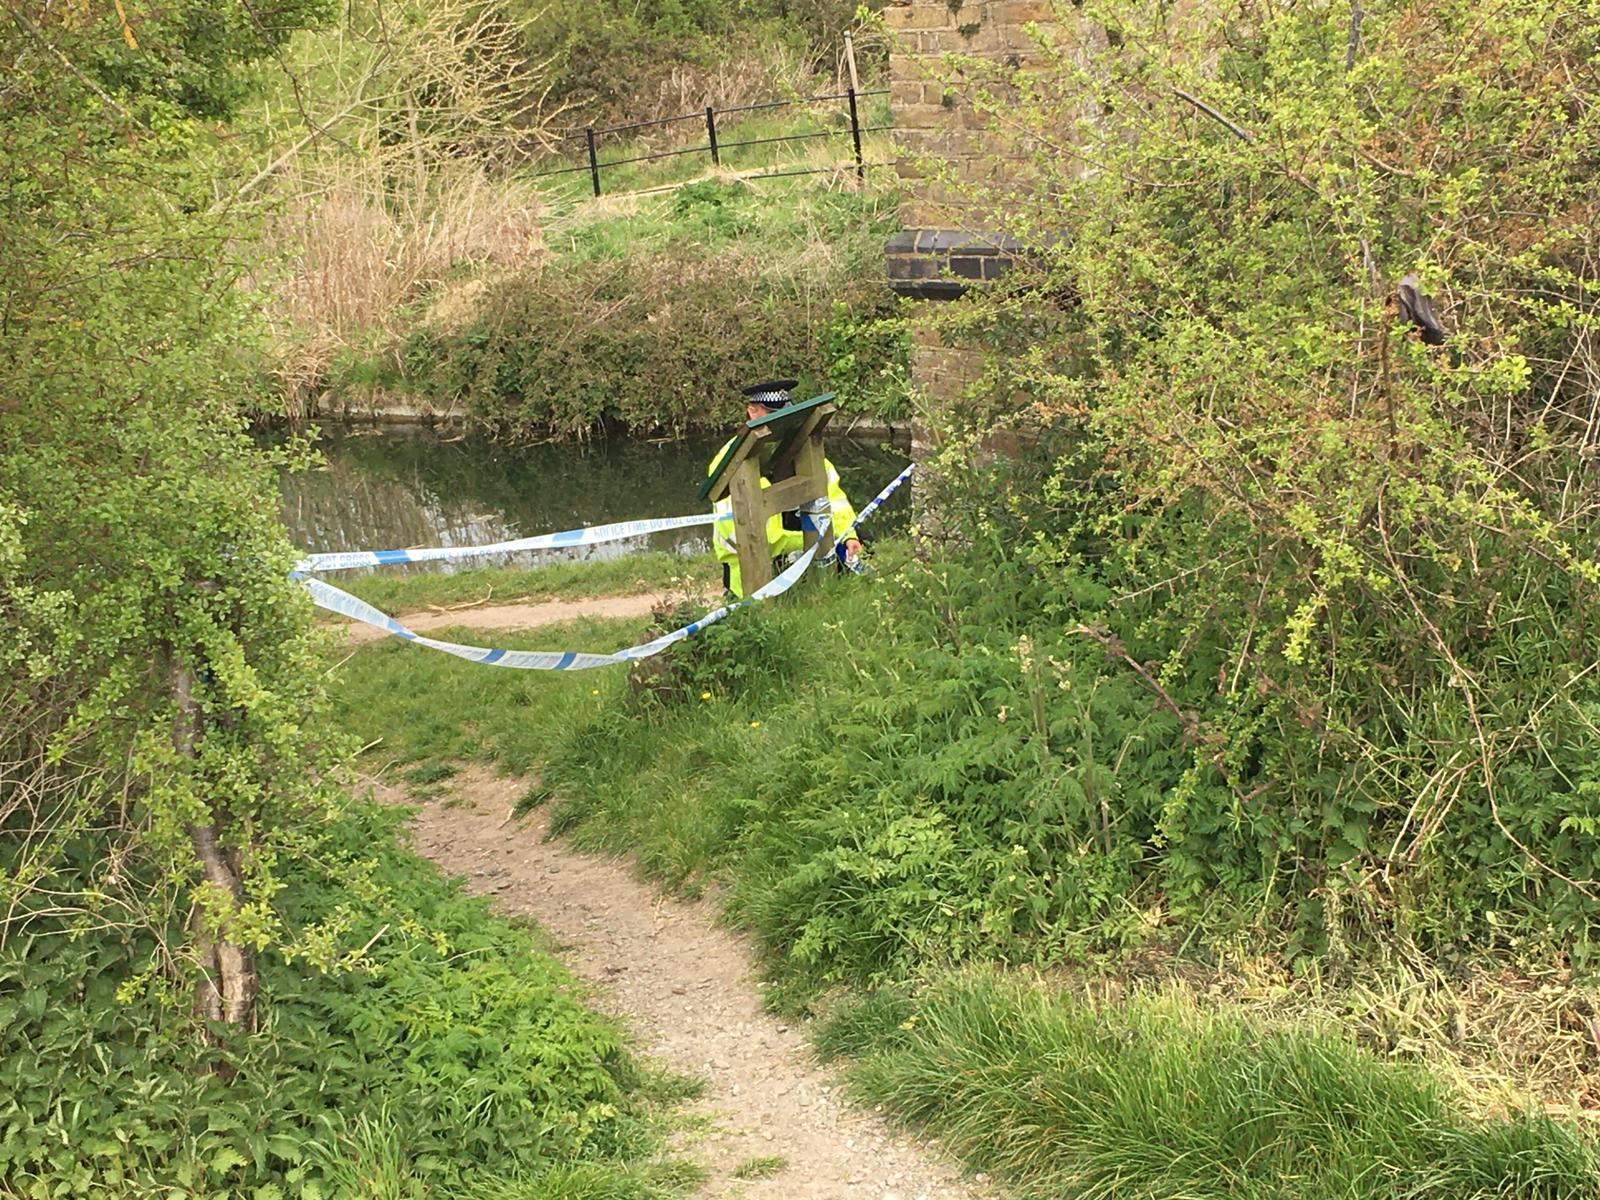 Police were seen taping off parts of the path near the canal